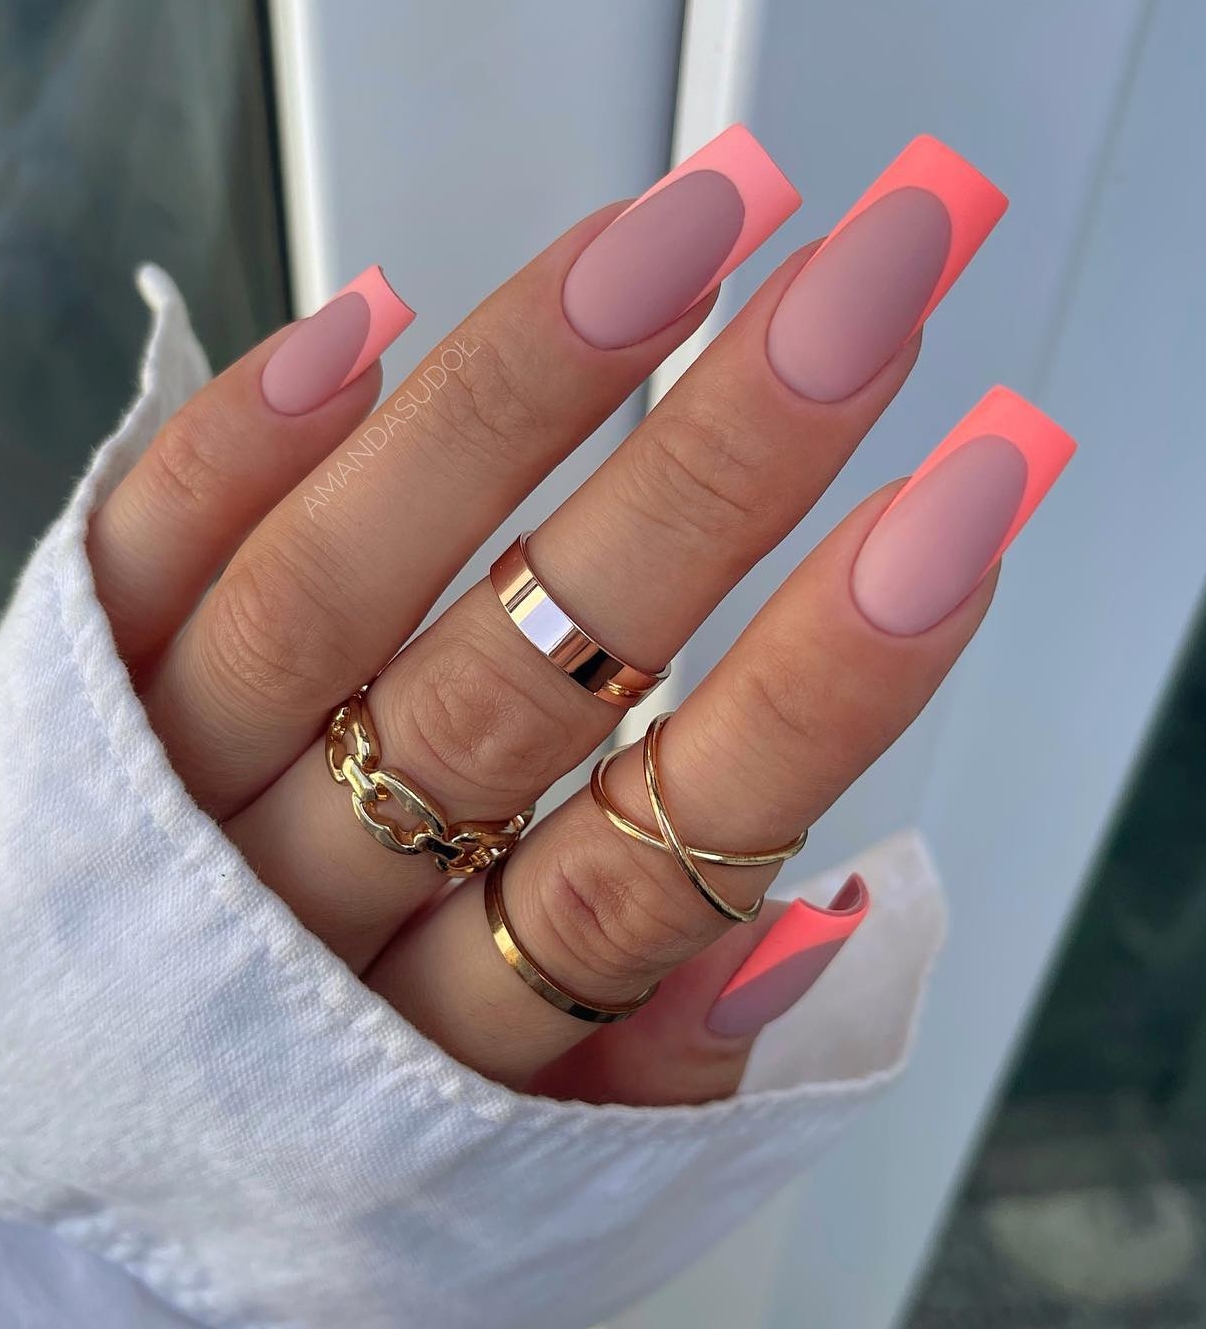 long Square Nails with Pink French Tips